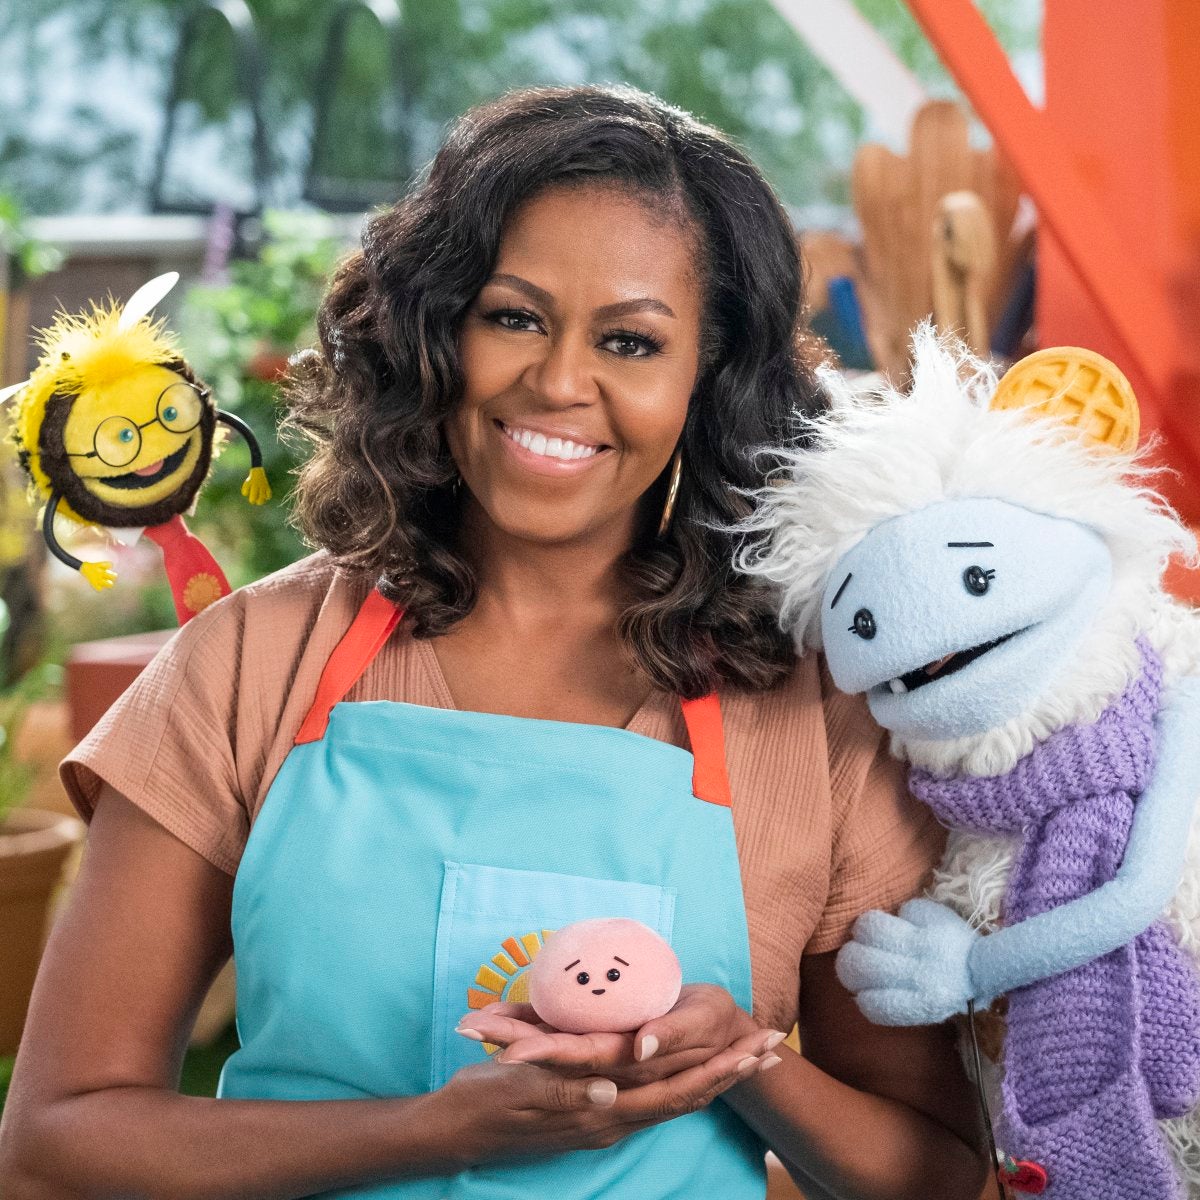 Watch: Michelle Obama Is Launching A Children’s Show On Netflix